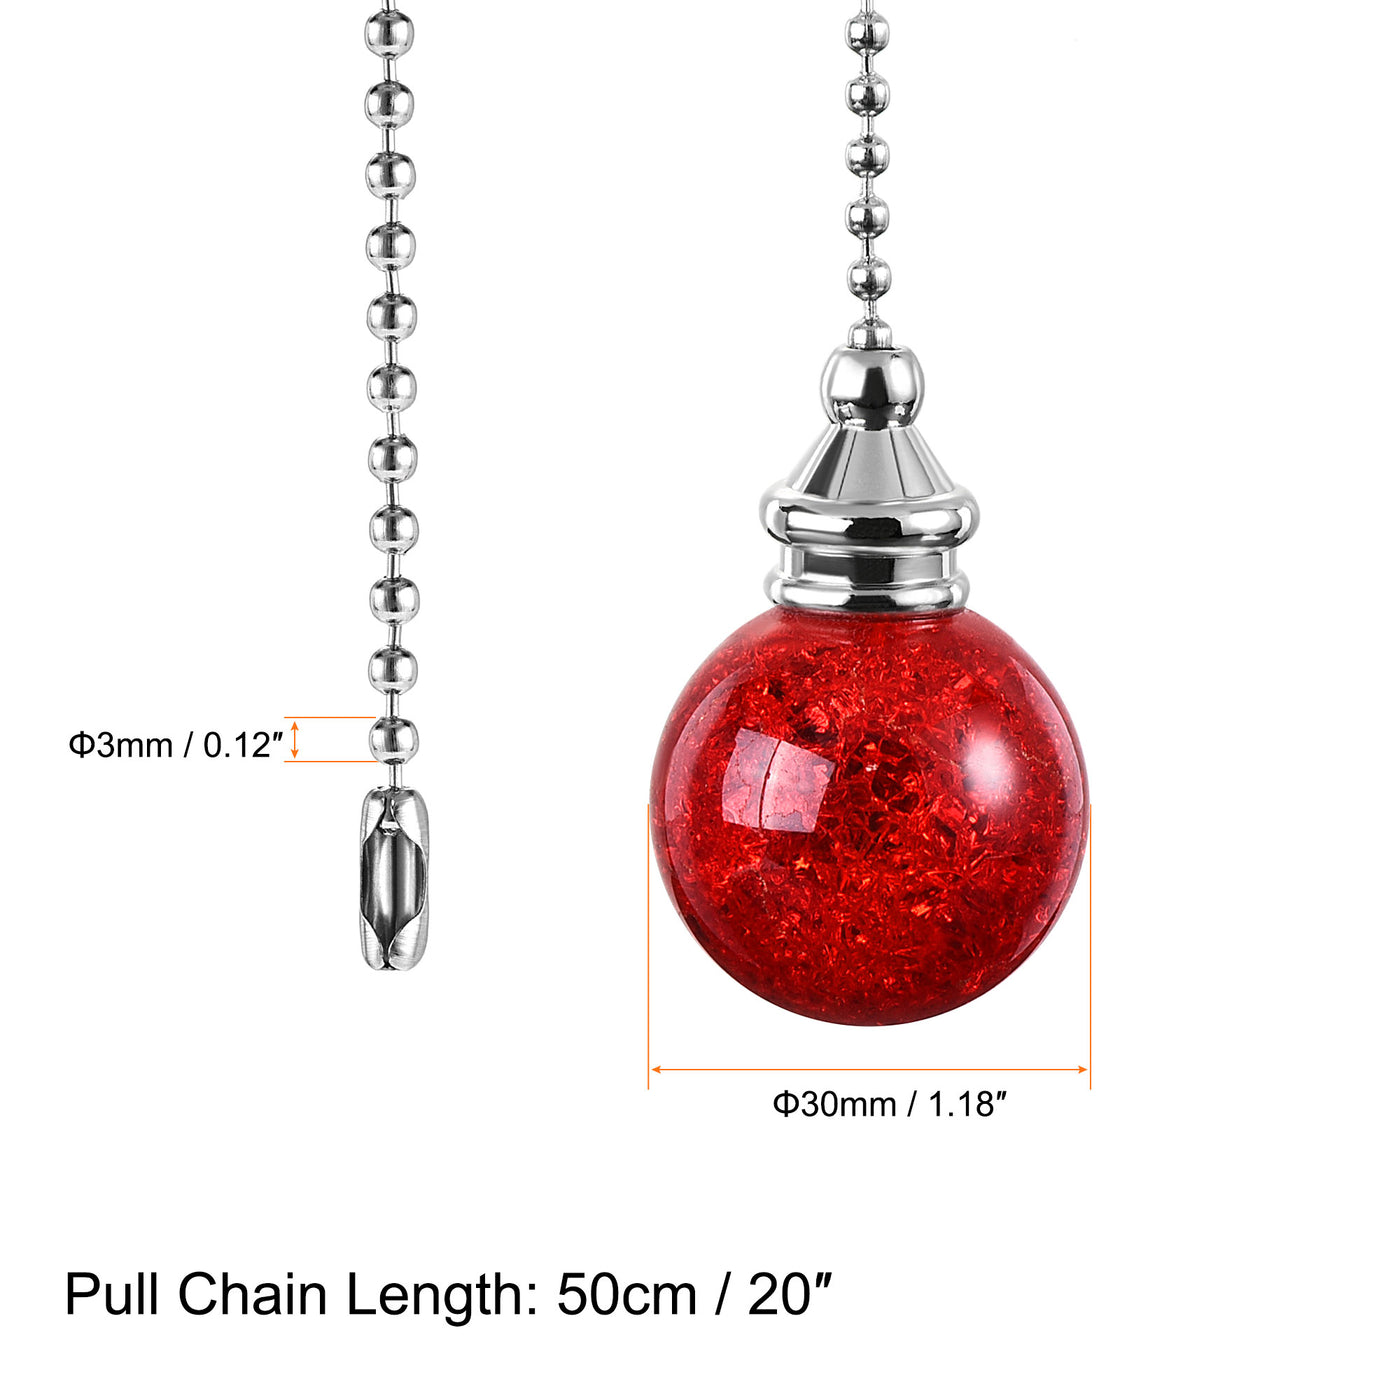 uxcell Uxcell 20 Inch Ceiling Fan Pull Chain, Decorative Crystal Fan Pull Chain Ornament Extension, 3mm Diameter Beaded 30mm Ice Cracked Ball Pendant, Red 2Pcs